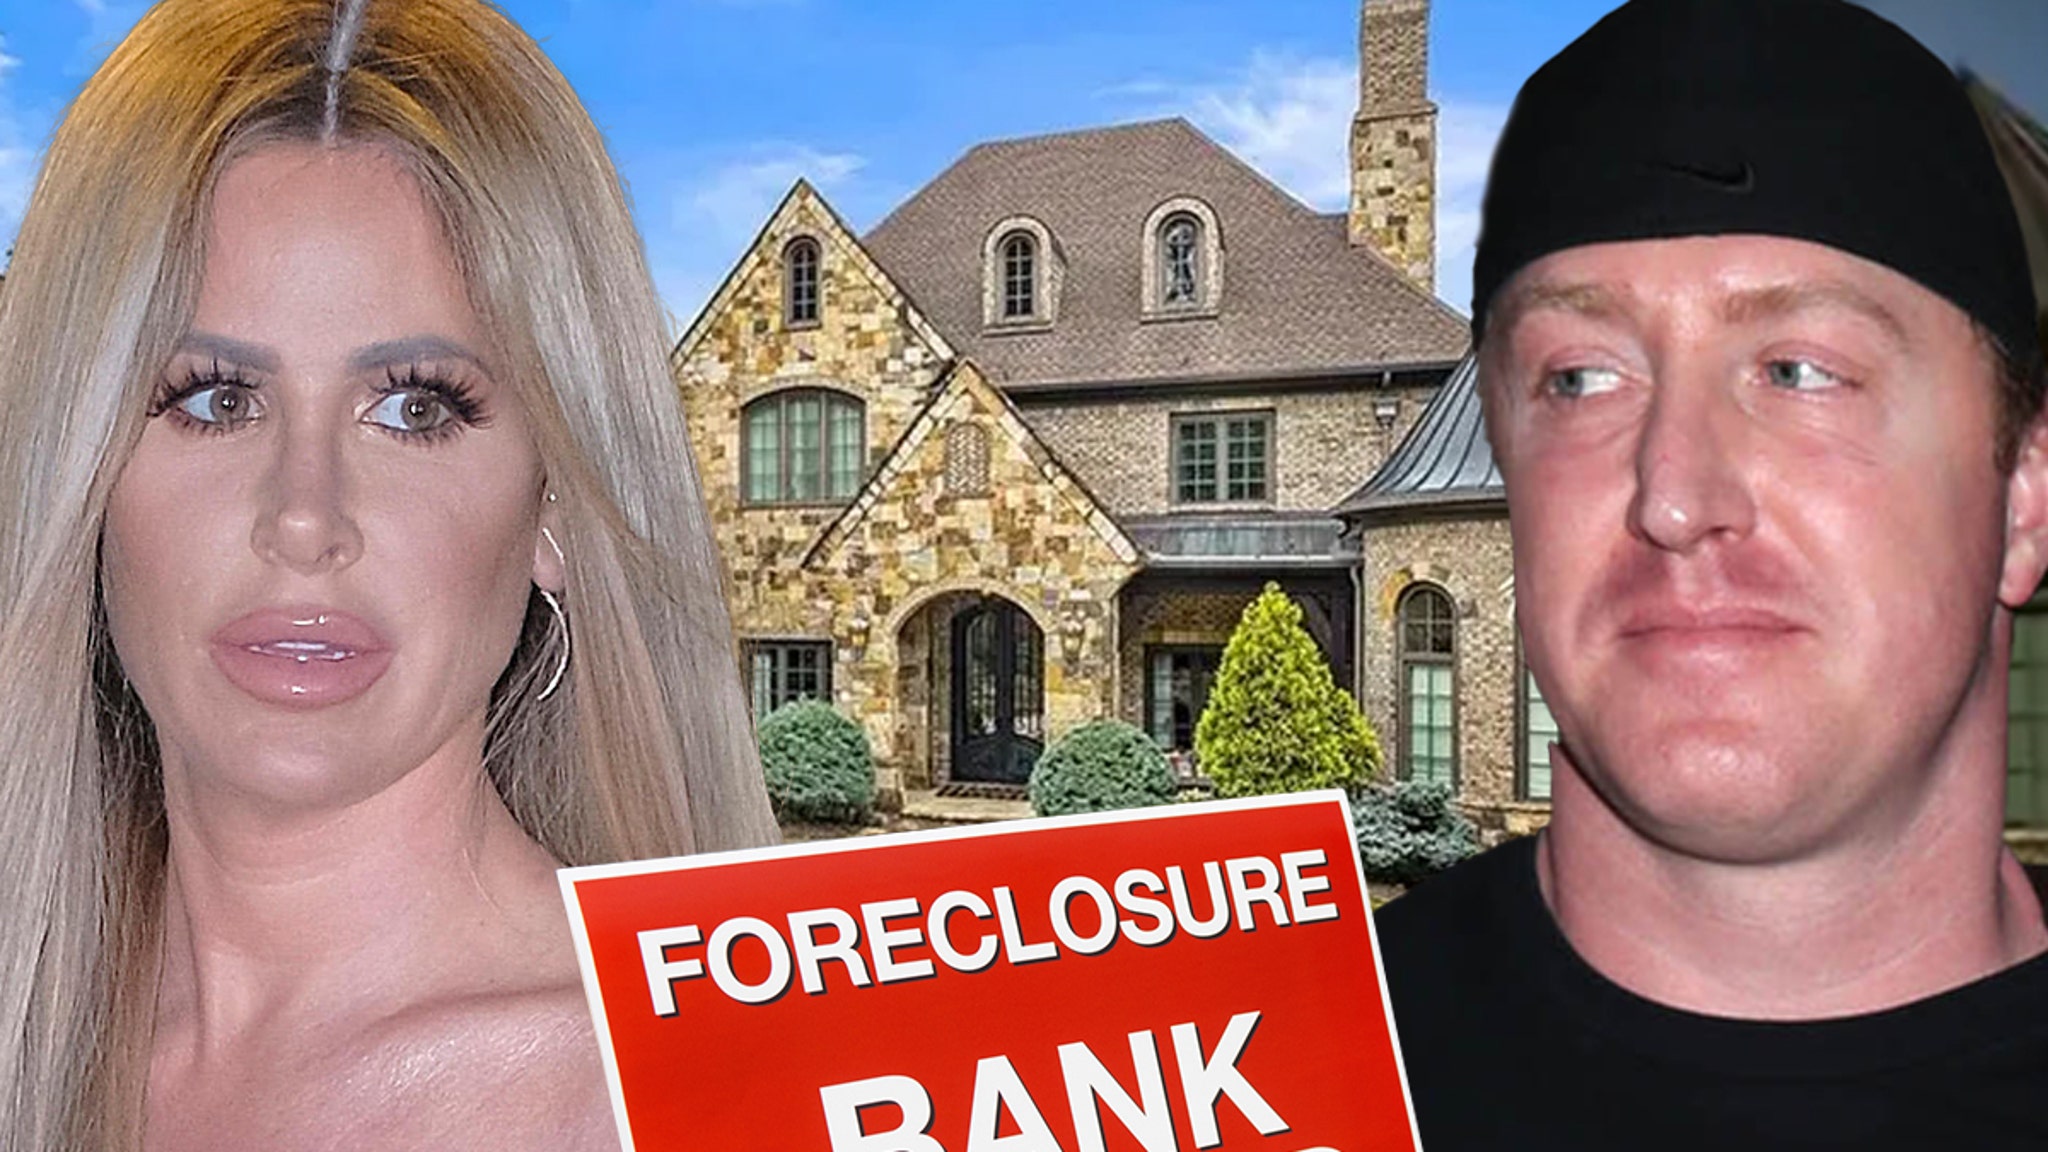 Kim Zolciak and Kroy Biermann’s Bank Says It Has Right To Foreclose